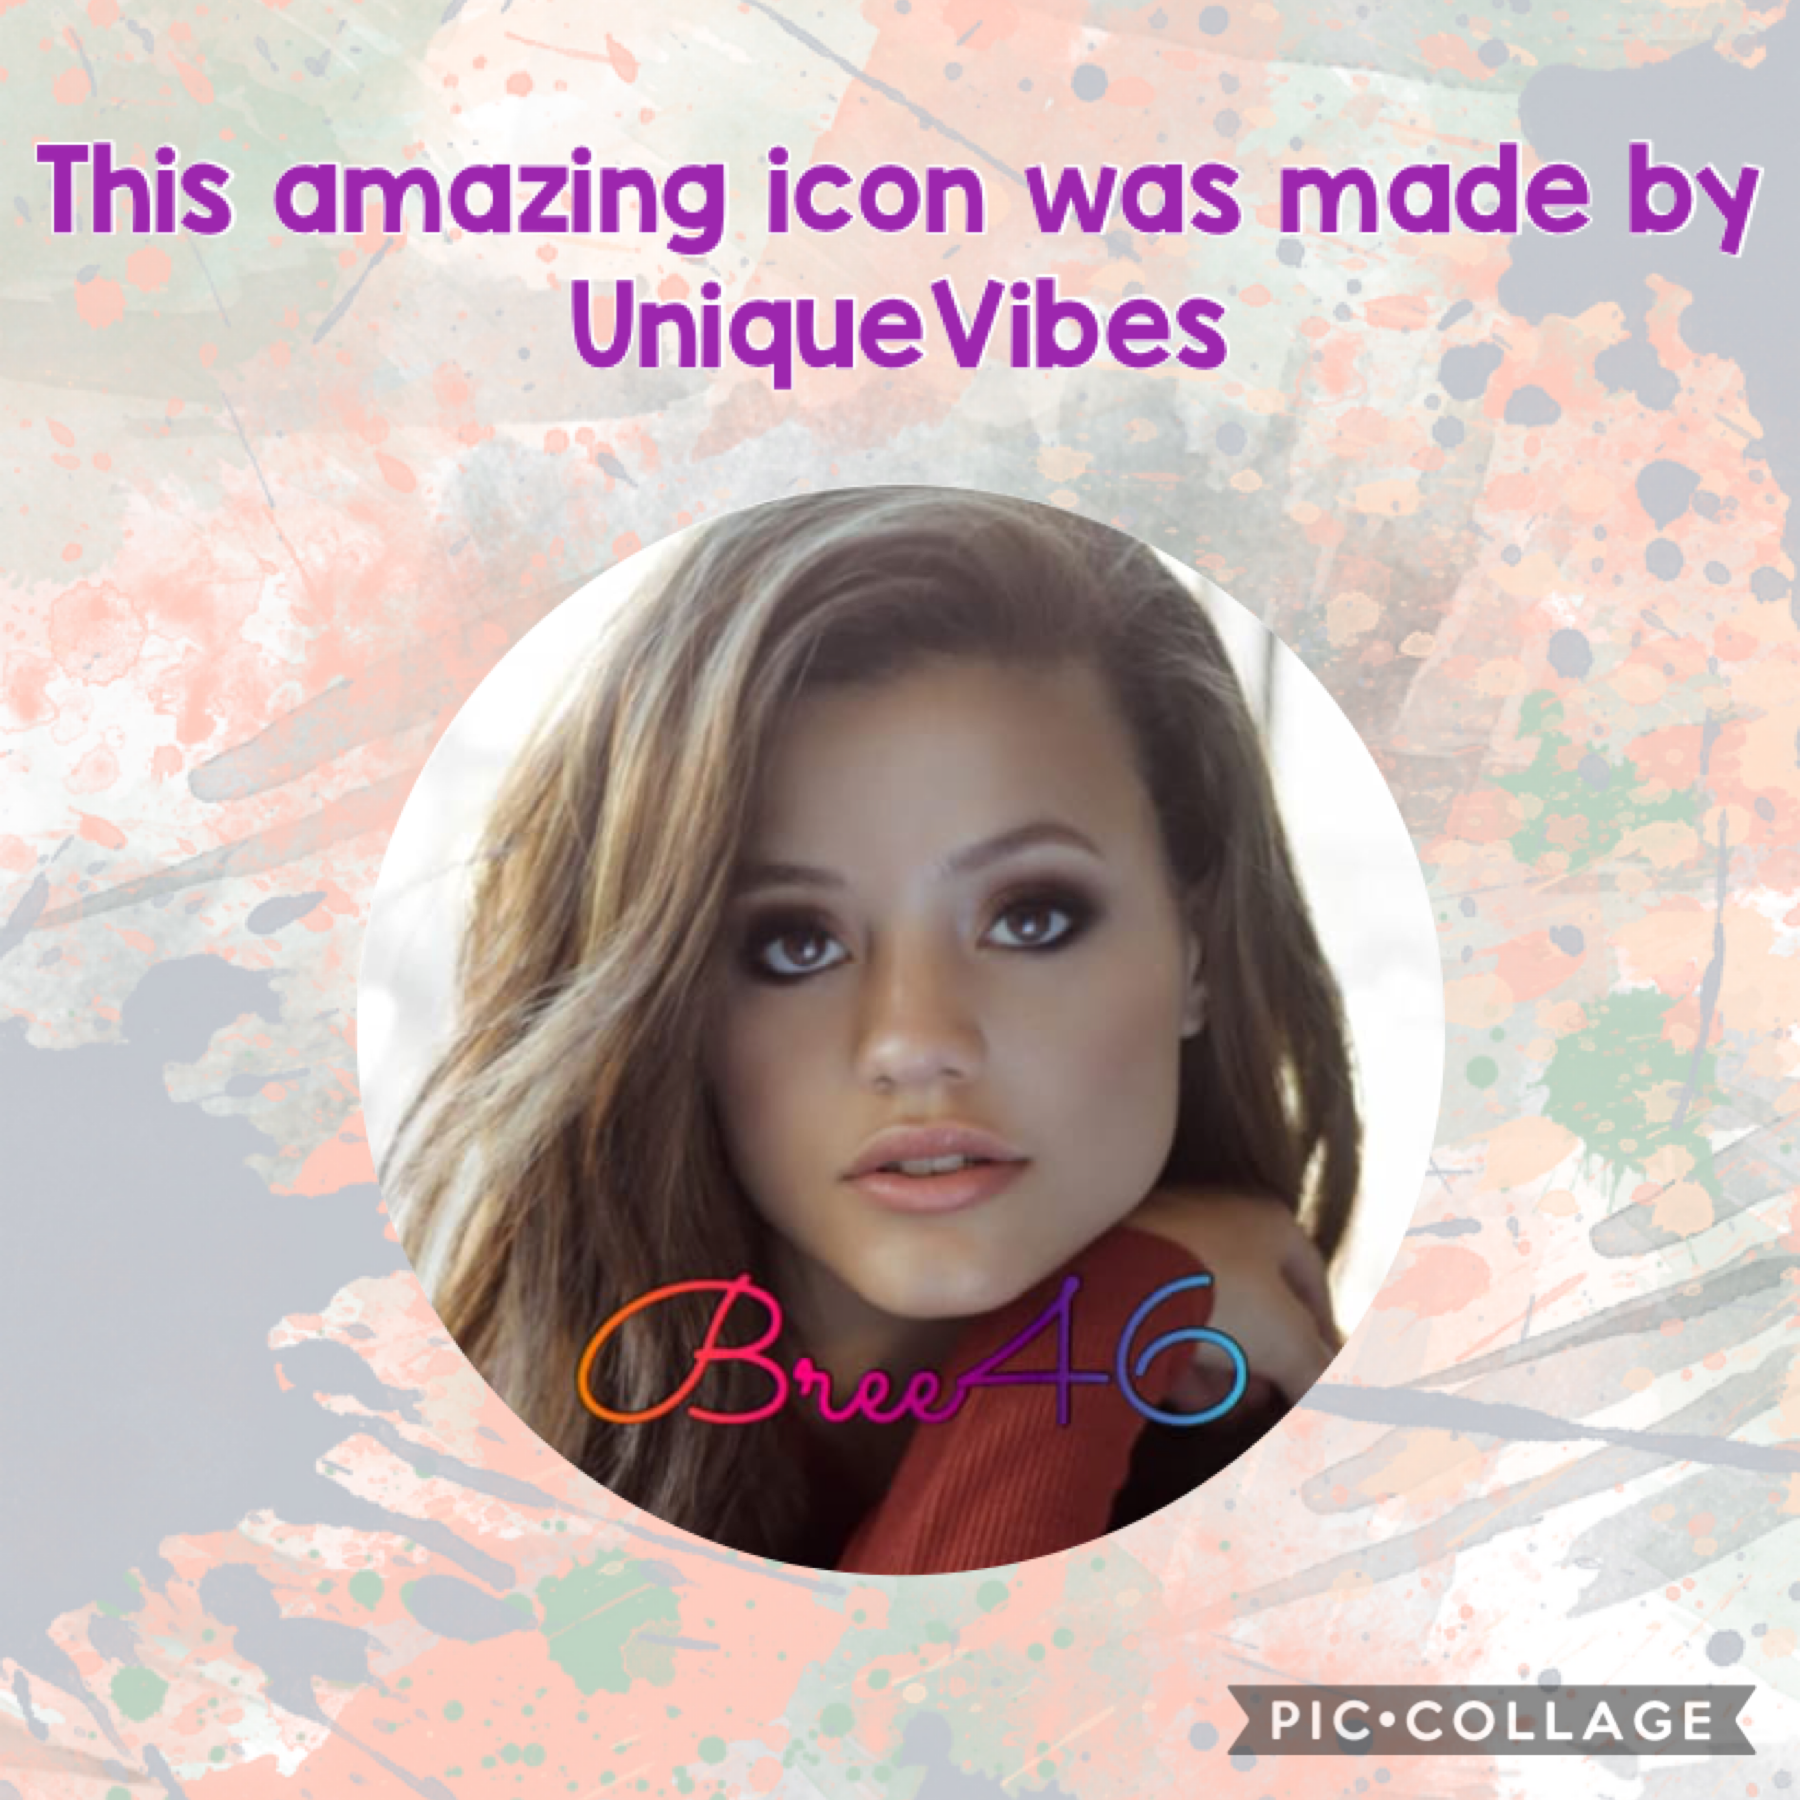 This amazing icon was made by unique vibes